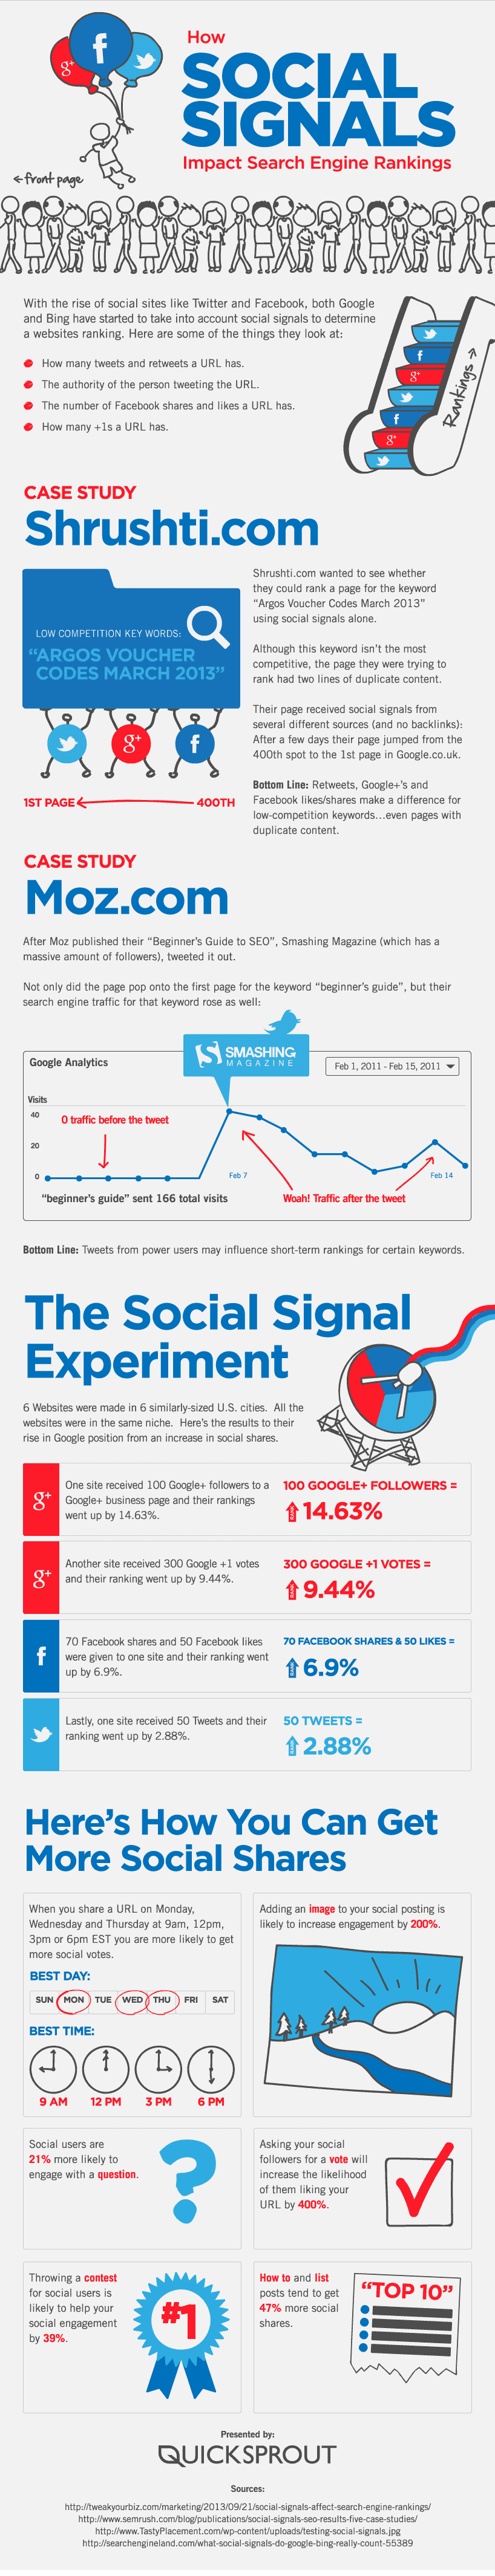 Featured Image - Social Media Signals and SEO